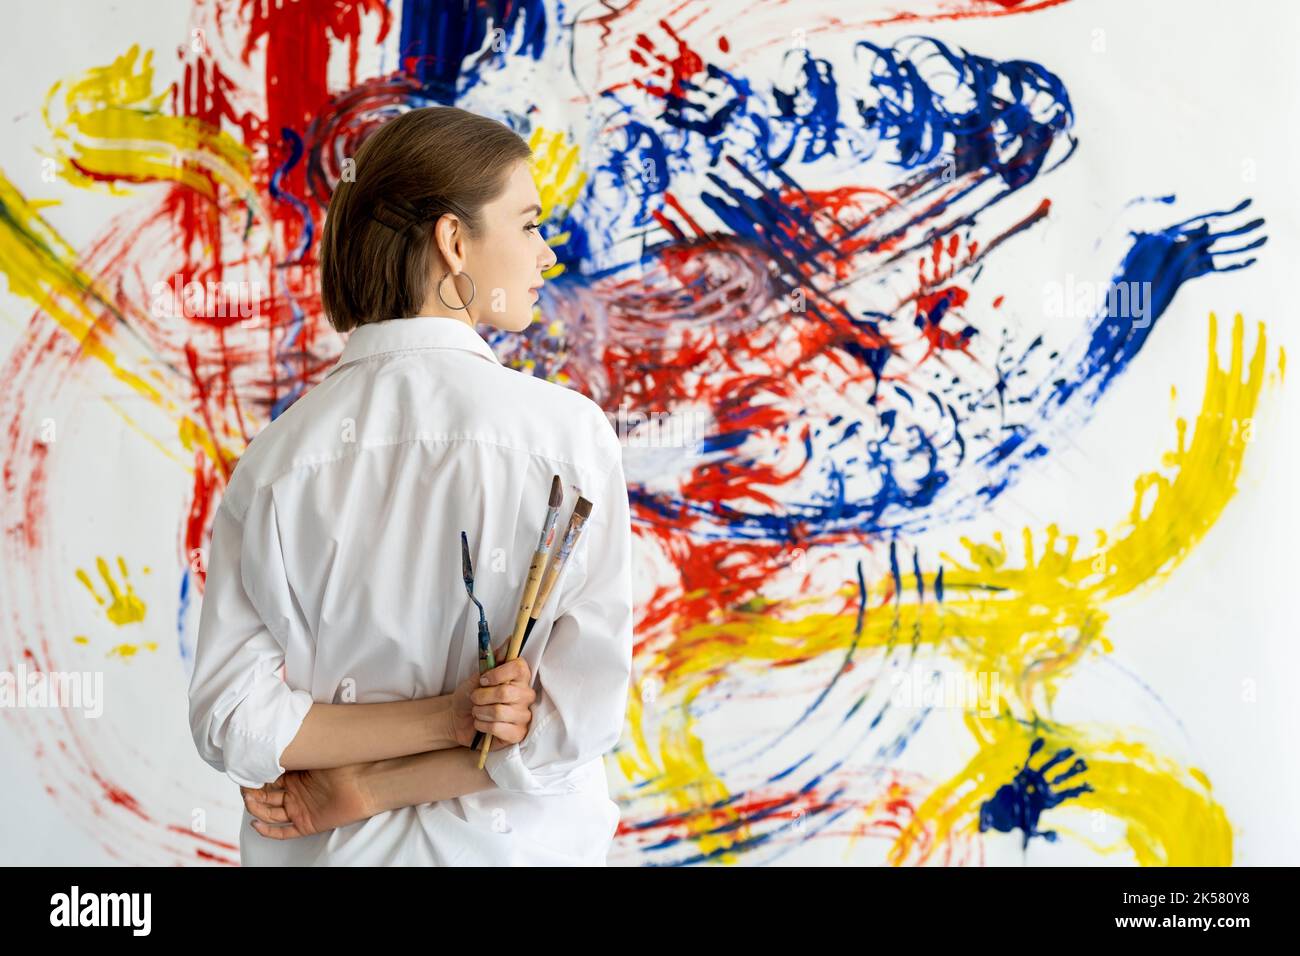 https://c8.alamy.com/comp/2K580Y8/art-therapy-hand-painting-woman-with-colorful-wall-2K580Y8.jpg